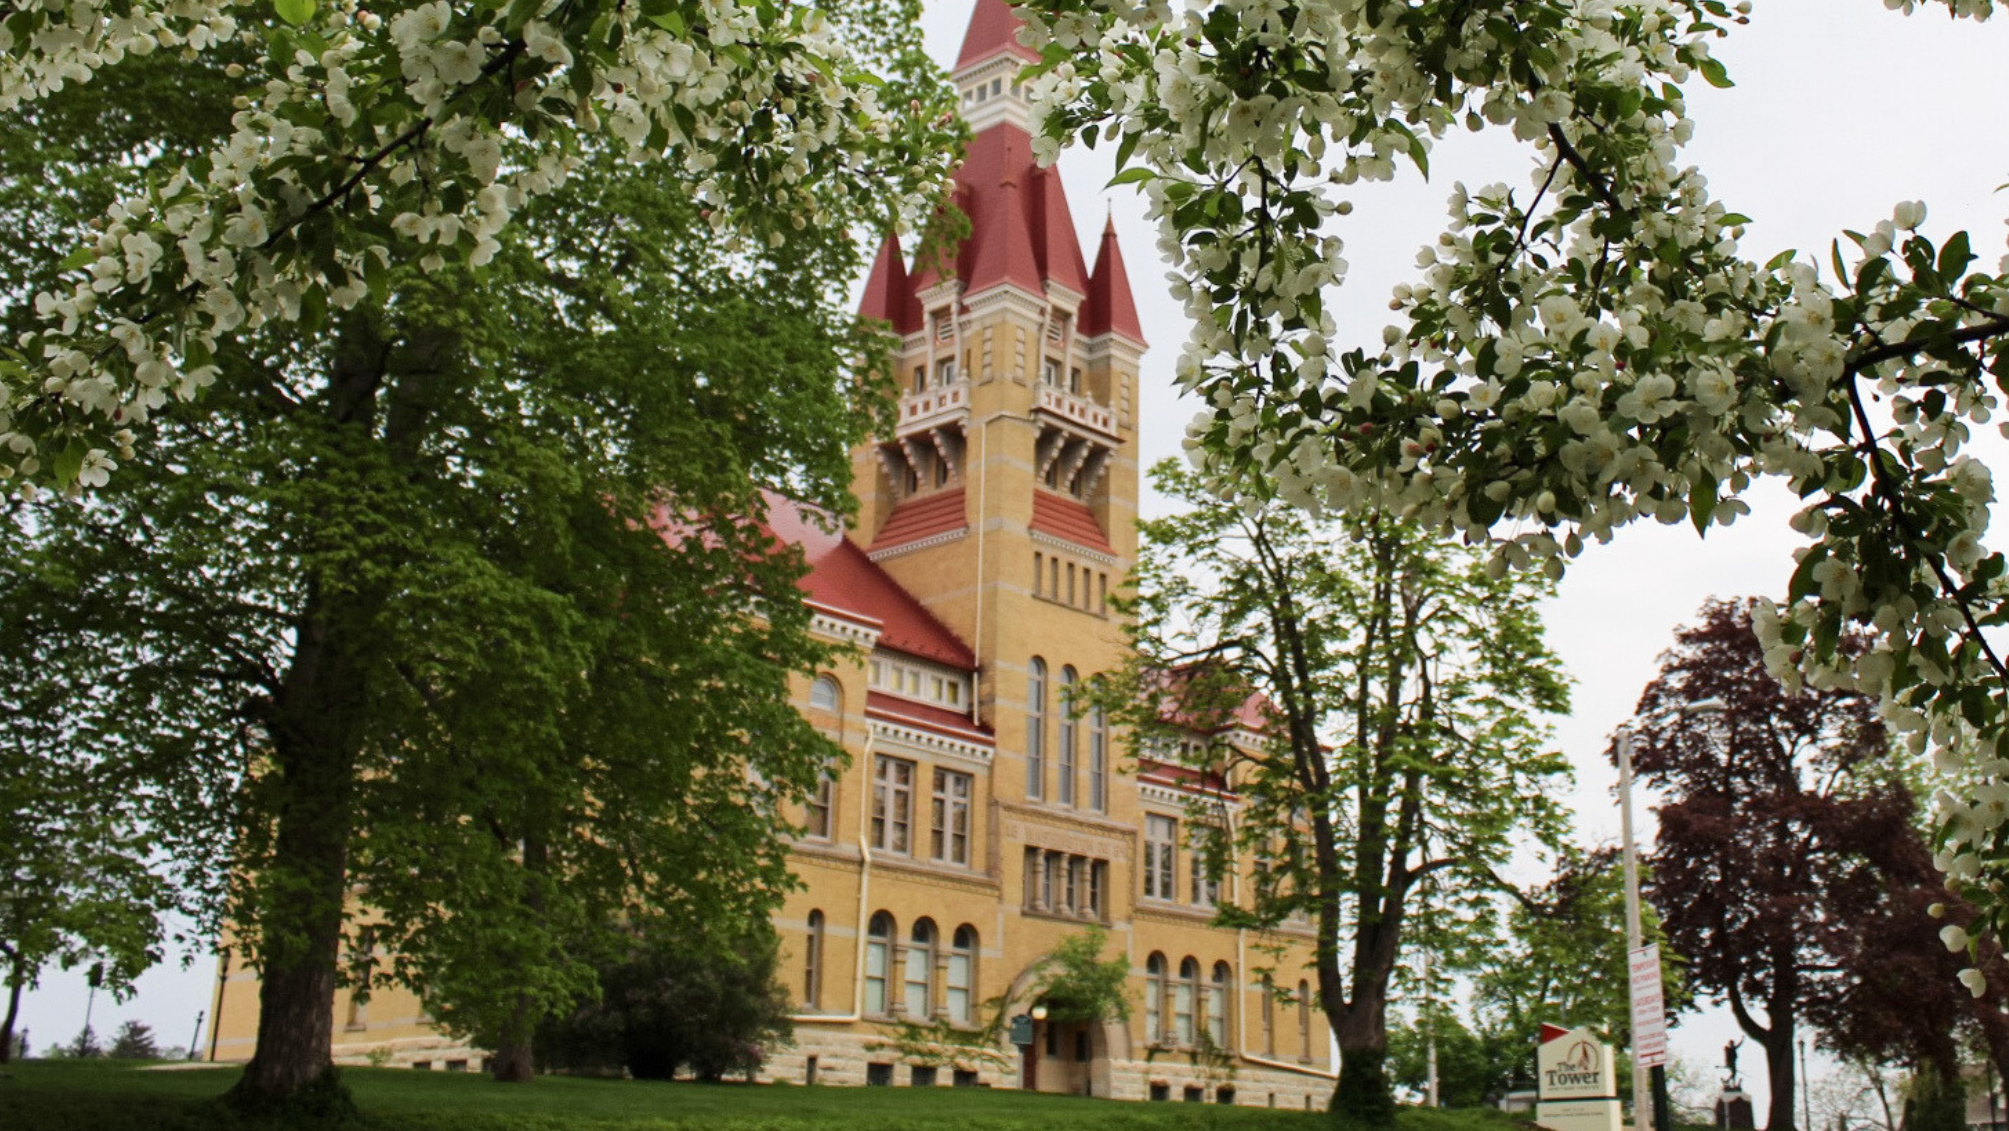 1889 Courthouse – Learn Your Landmarks